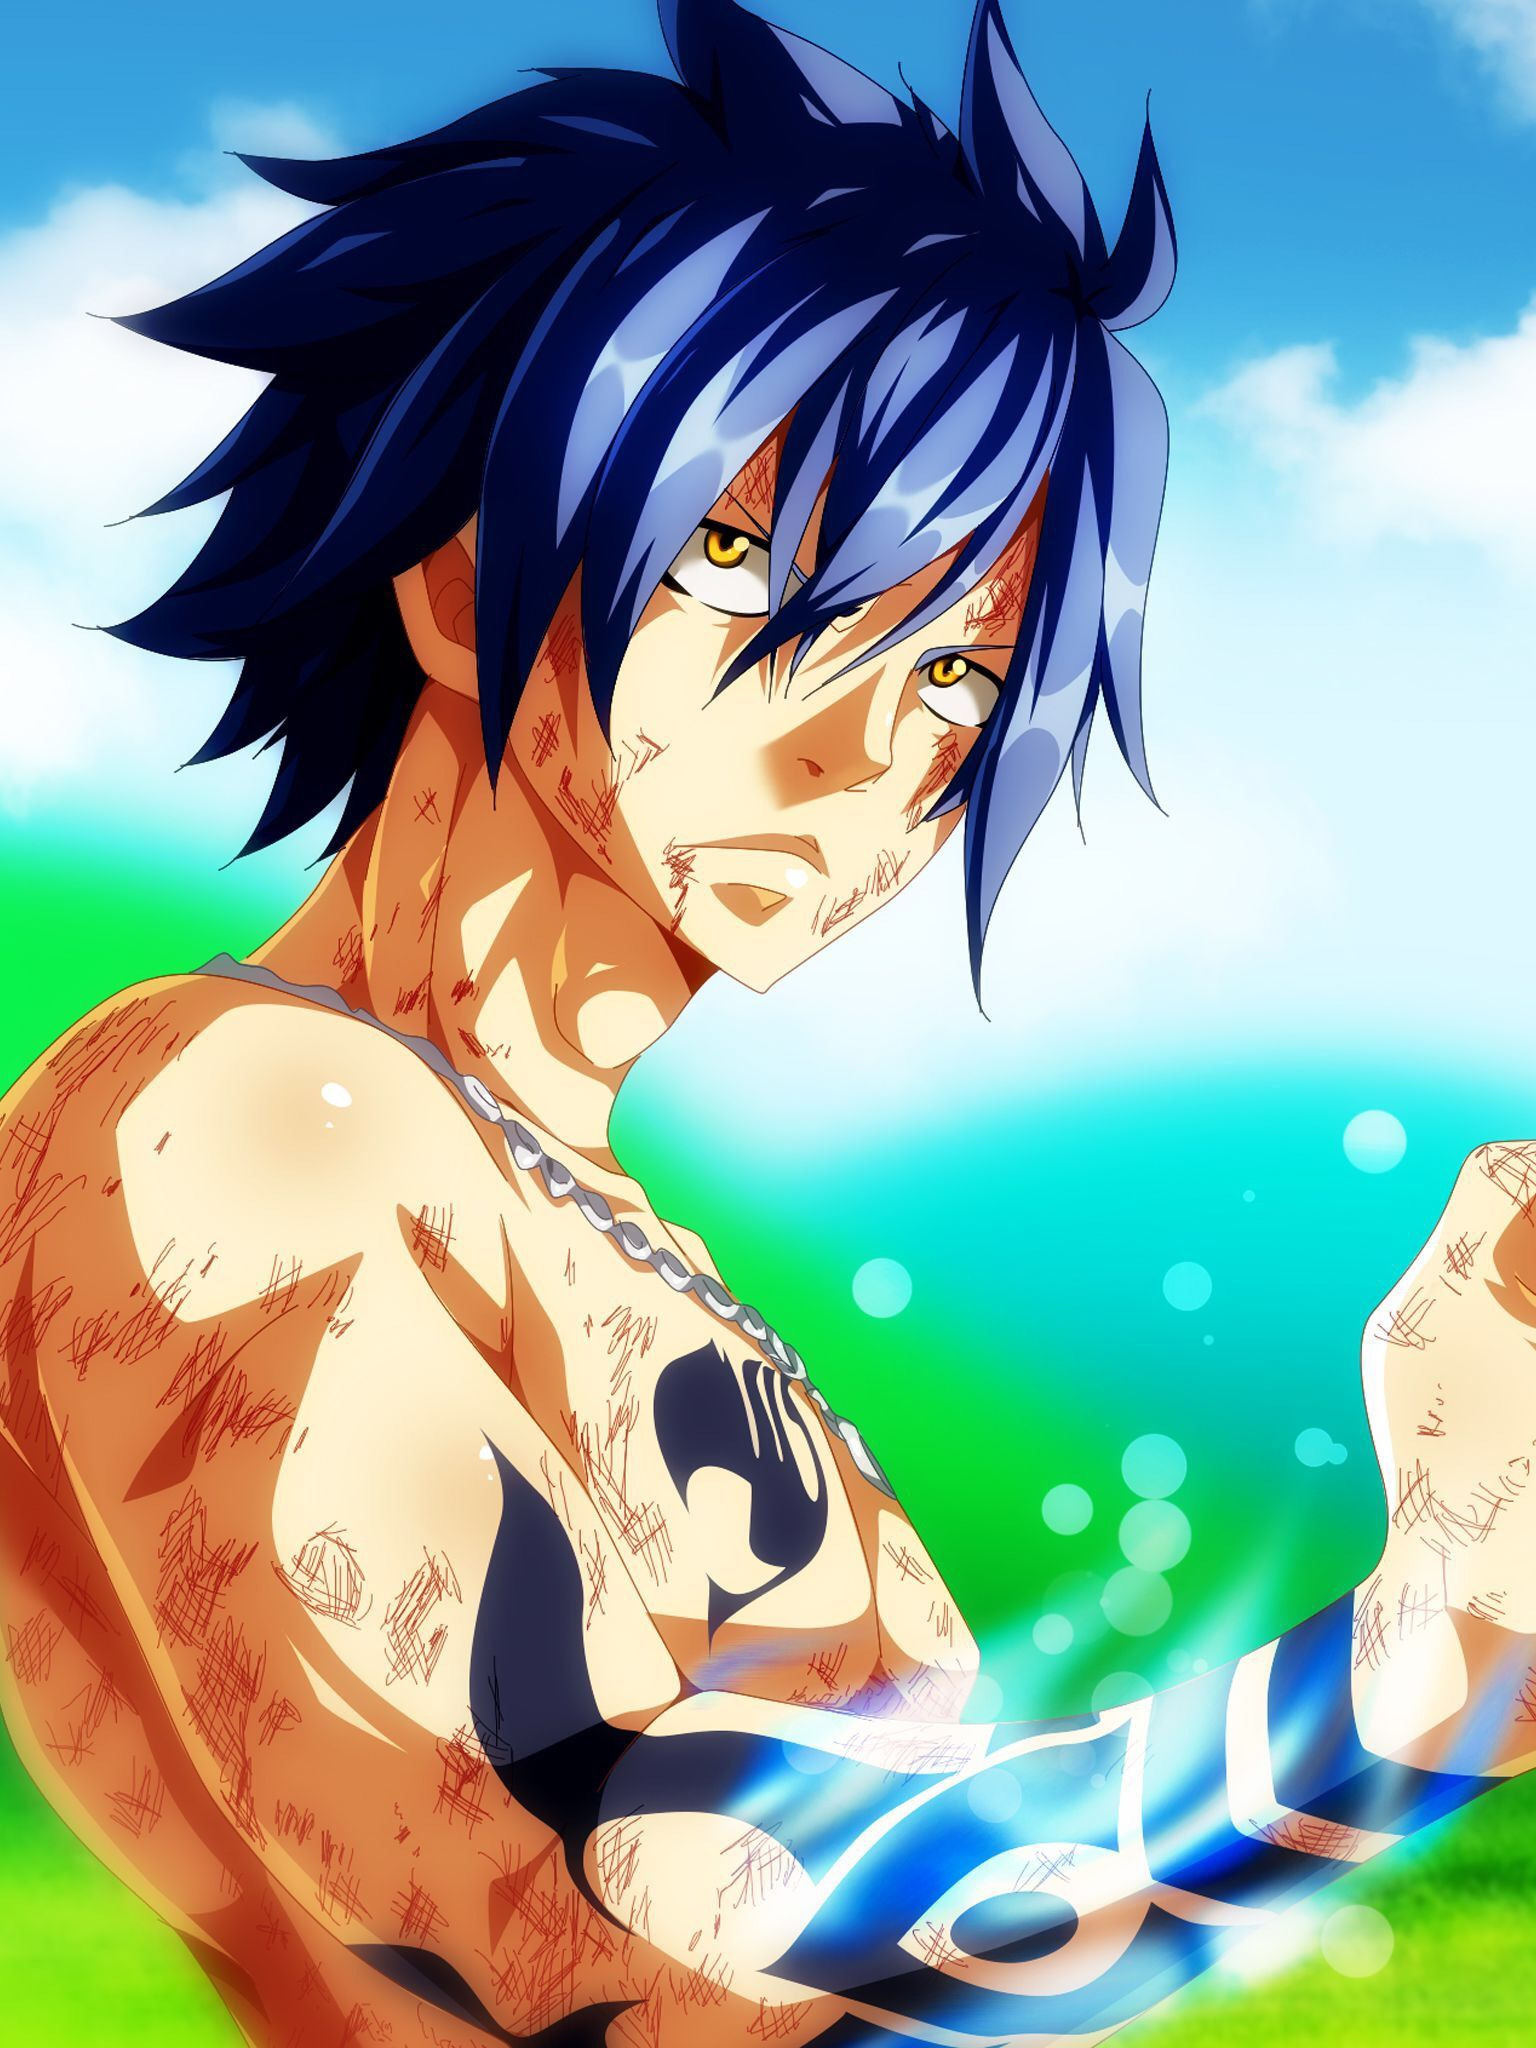 Gray Fullbuster: Fairy Tail, Serialized in the manga anthology Weekly Shonen Magazine, 2006- 2017. 1540x2050 HD Wallpaper.